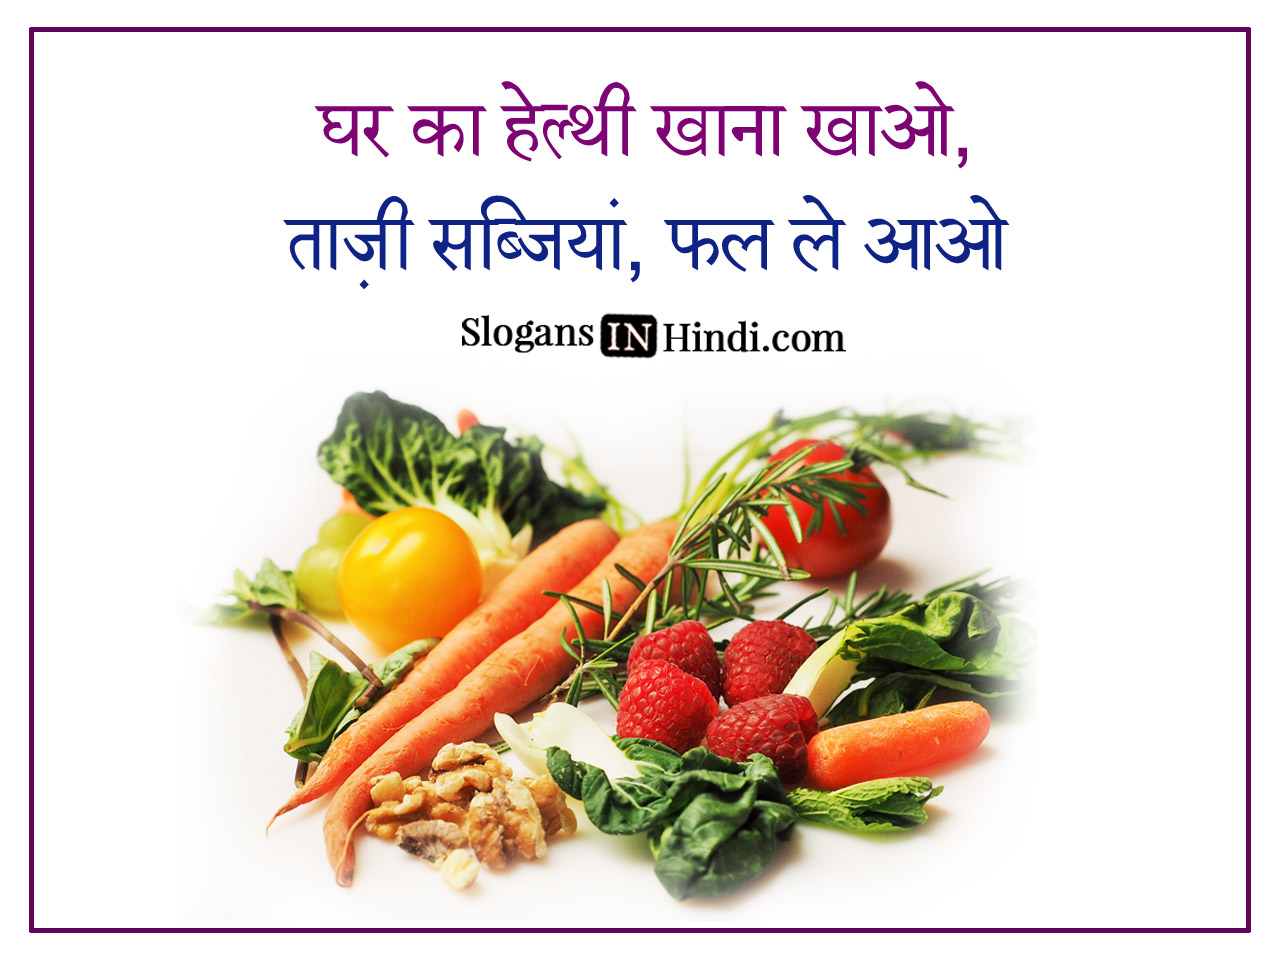 importance of healthy food in hindi essay